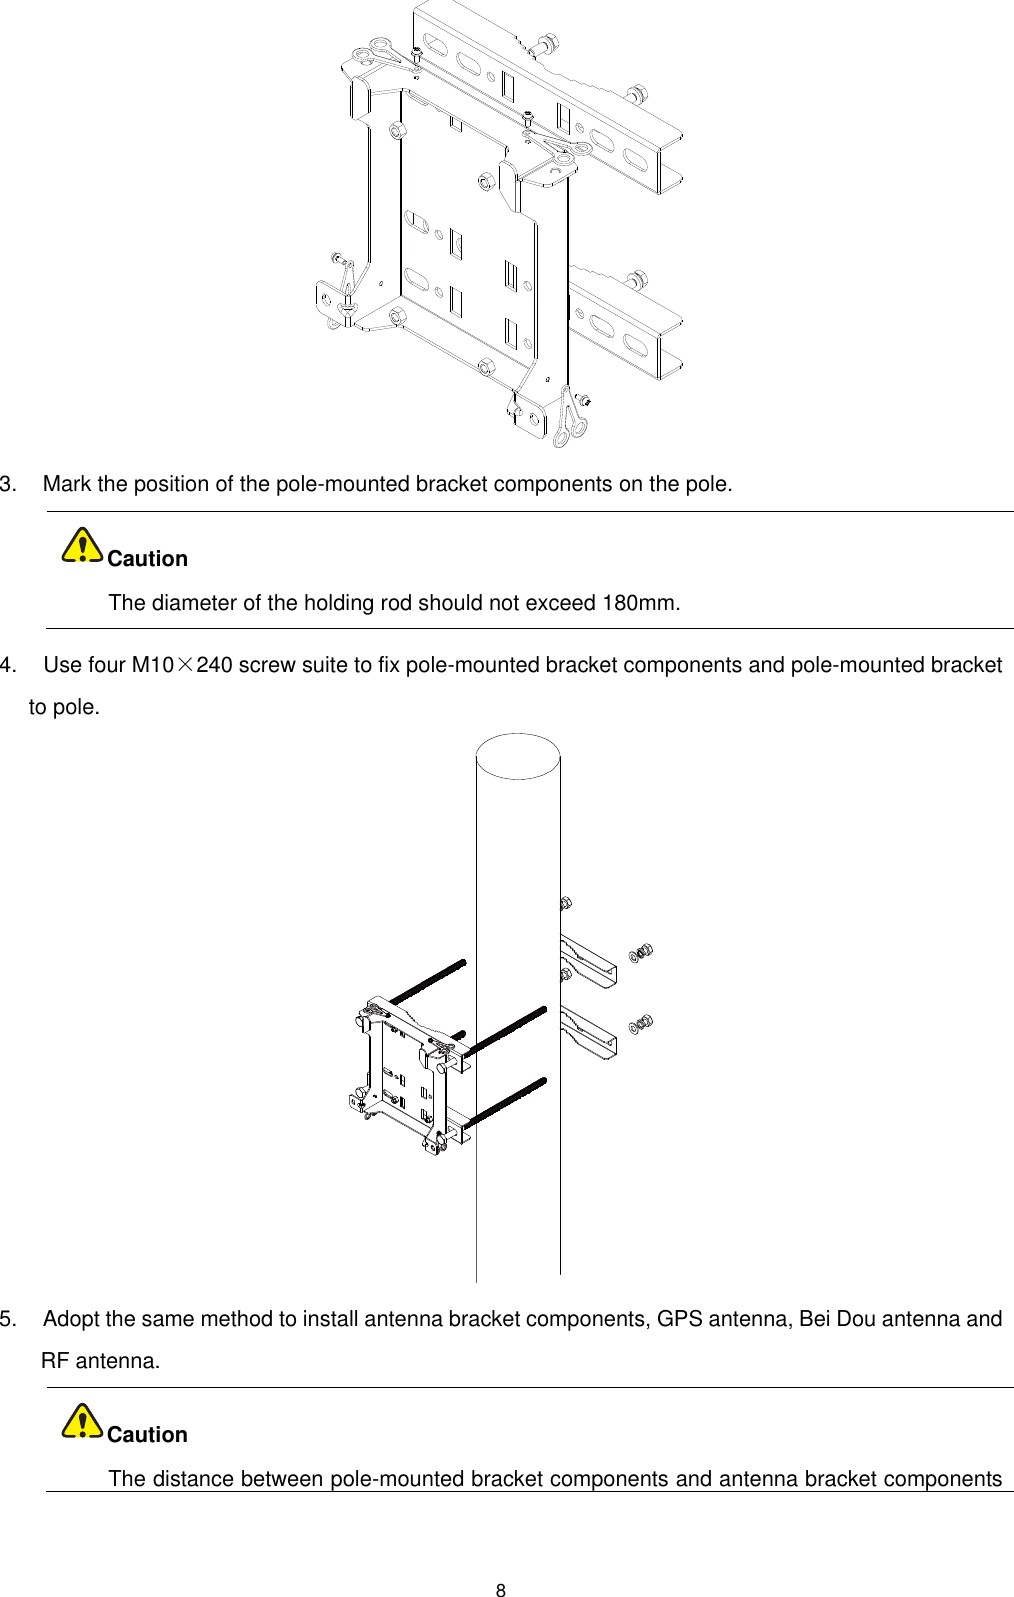  8  3.    Mark the position of the pole-mounted bracket components on the pole.  The diameter of the holding rod should not exceed 180mm. 4.    Use four M10×240 screw suite to fix pole-mounted bracket components and pole-mounted bracket to pole.  5.    Adopt the same method to install antenna bracket components, GPS antenna, Bei Dou antenna and RF antenna.  The distance between pole-mounted bracket components and antenna bracket components CautionCaution 